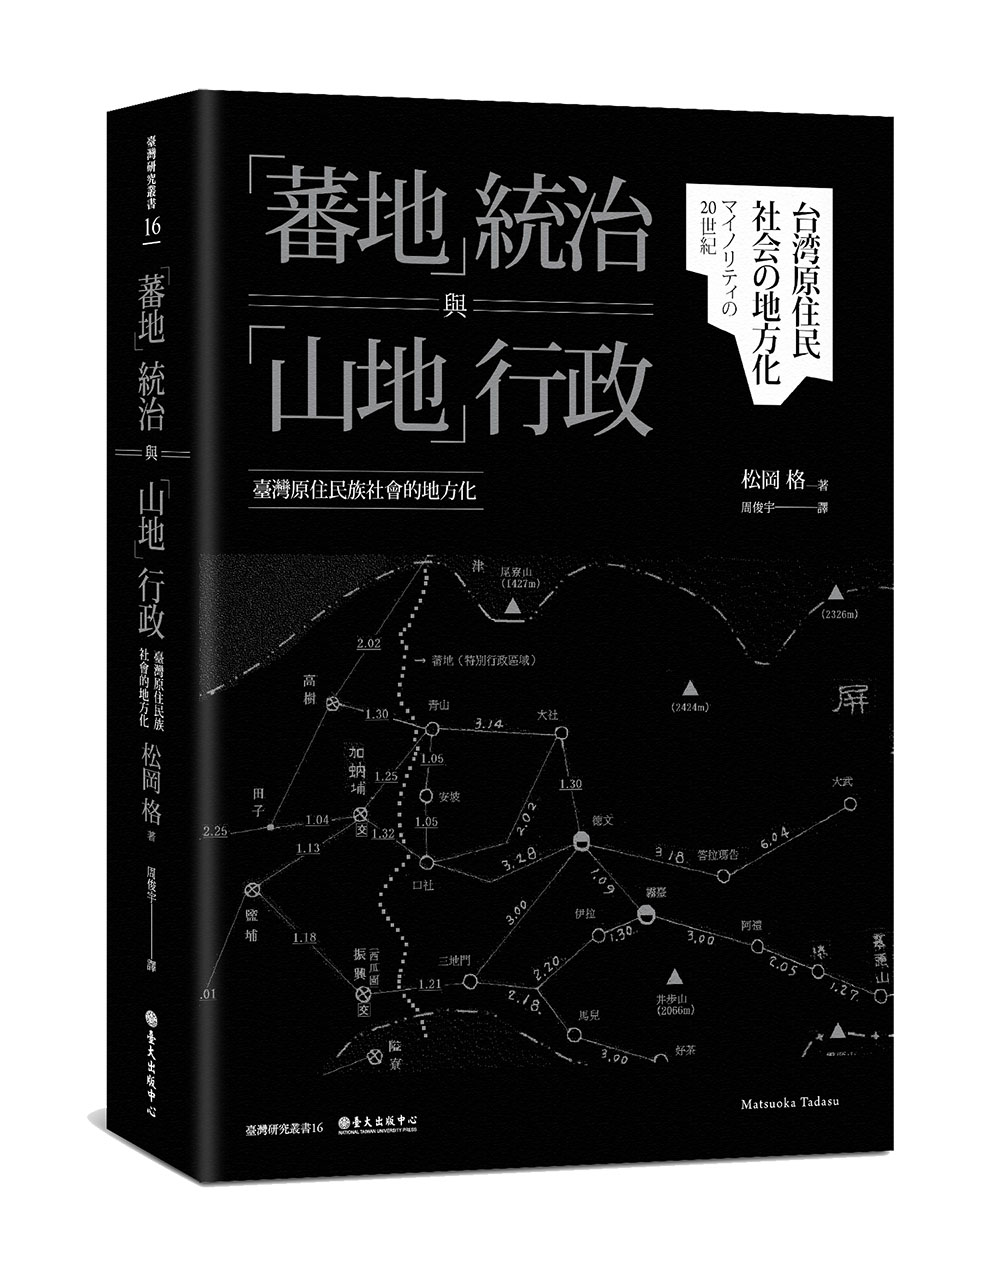 Governance of the Indigenous Peoples in 20th-Century Taiwan: From the Empire of Japan to the KMT Regime